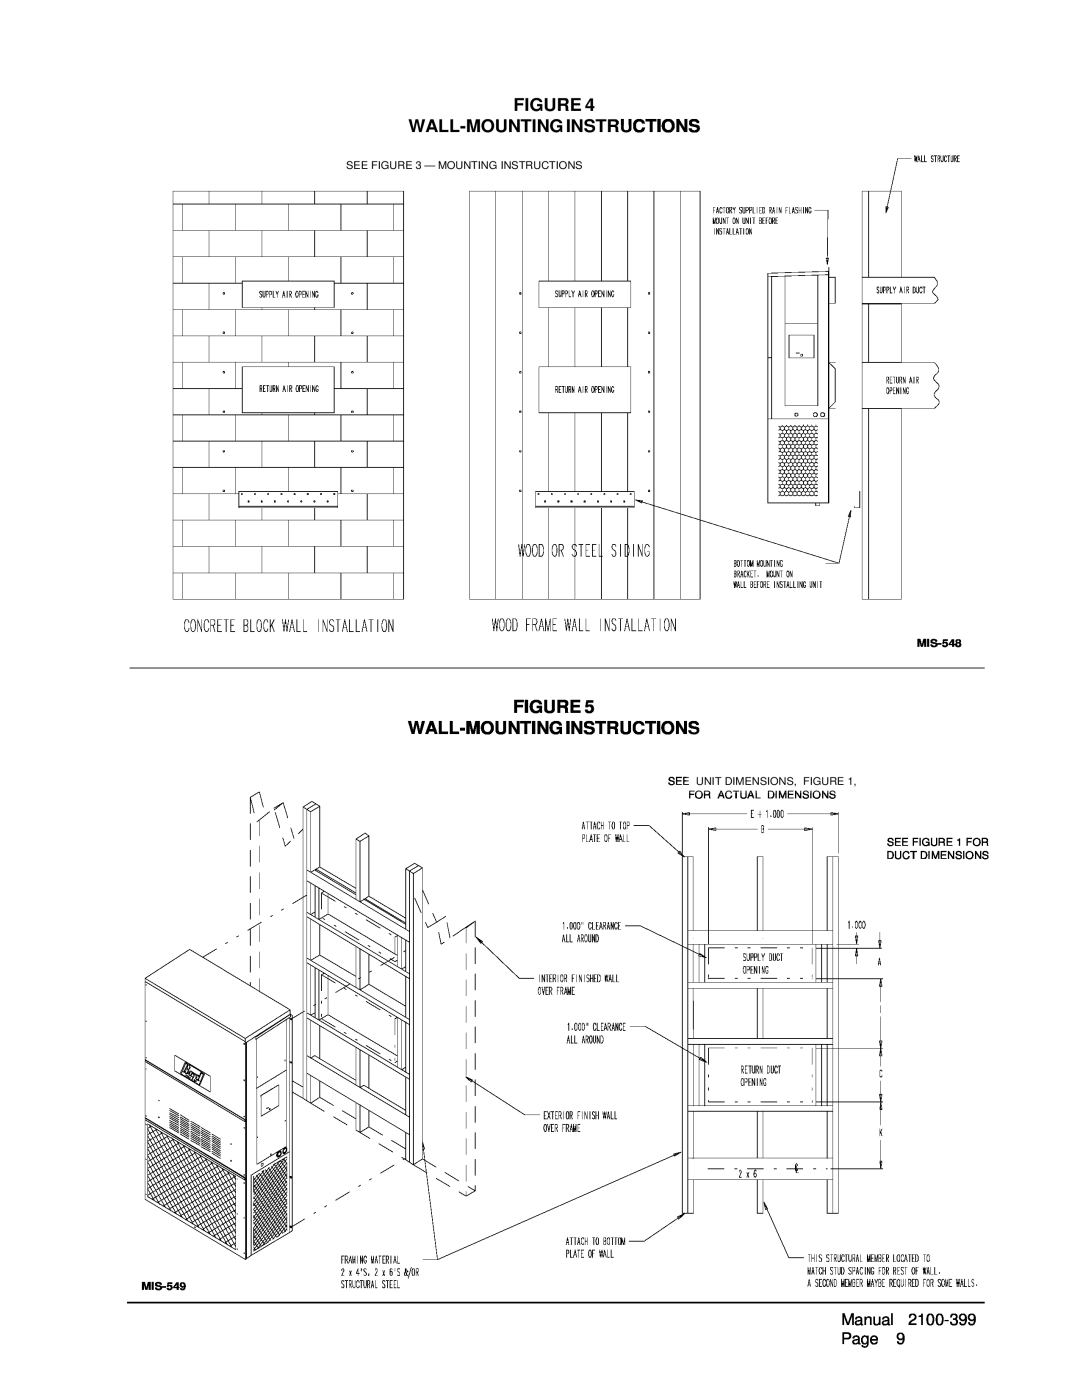 Bard WH421, WH602 Figure Wall-Mountinginstructions, See - Mounting Instructions, MIS-548, See For Duct Dimensions, MIS-549 